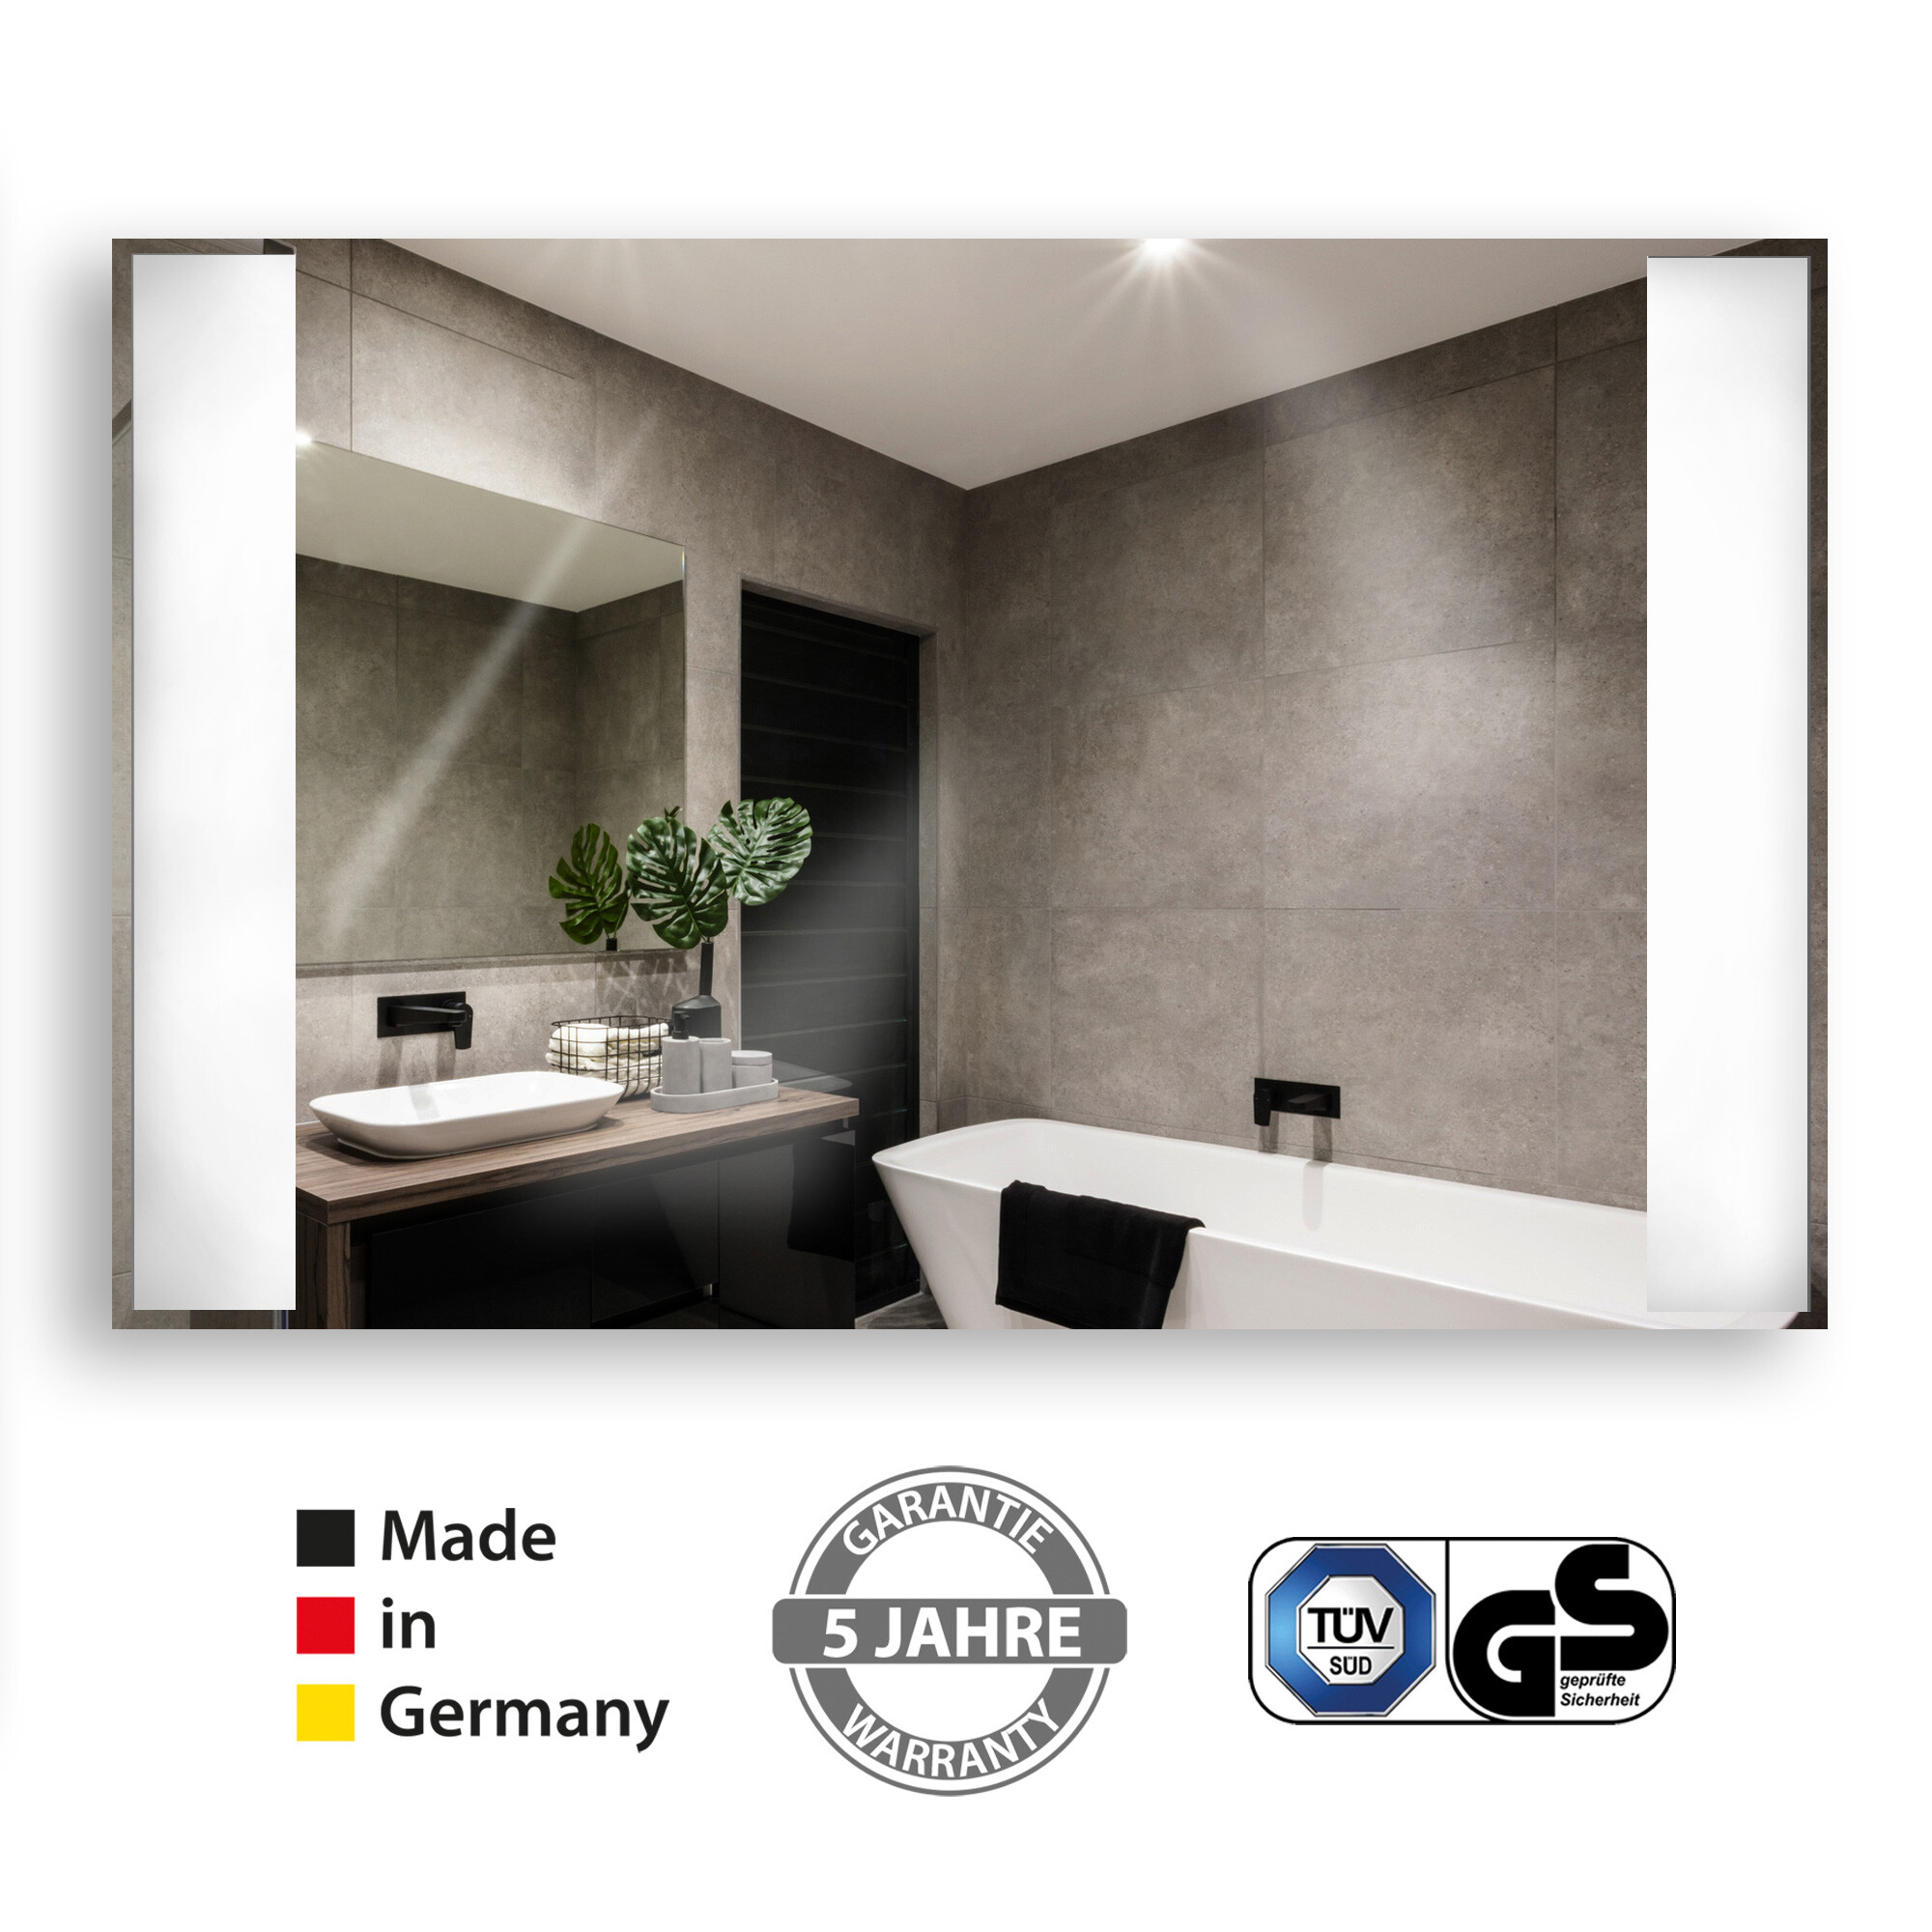 Infrared mirror heating panel in German quality